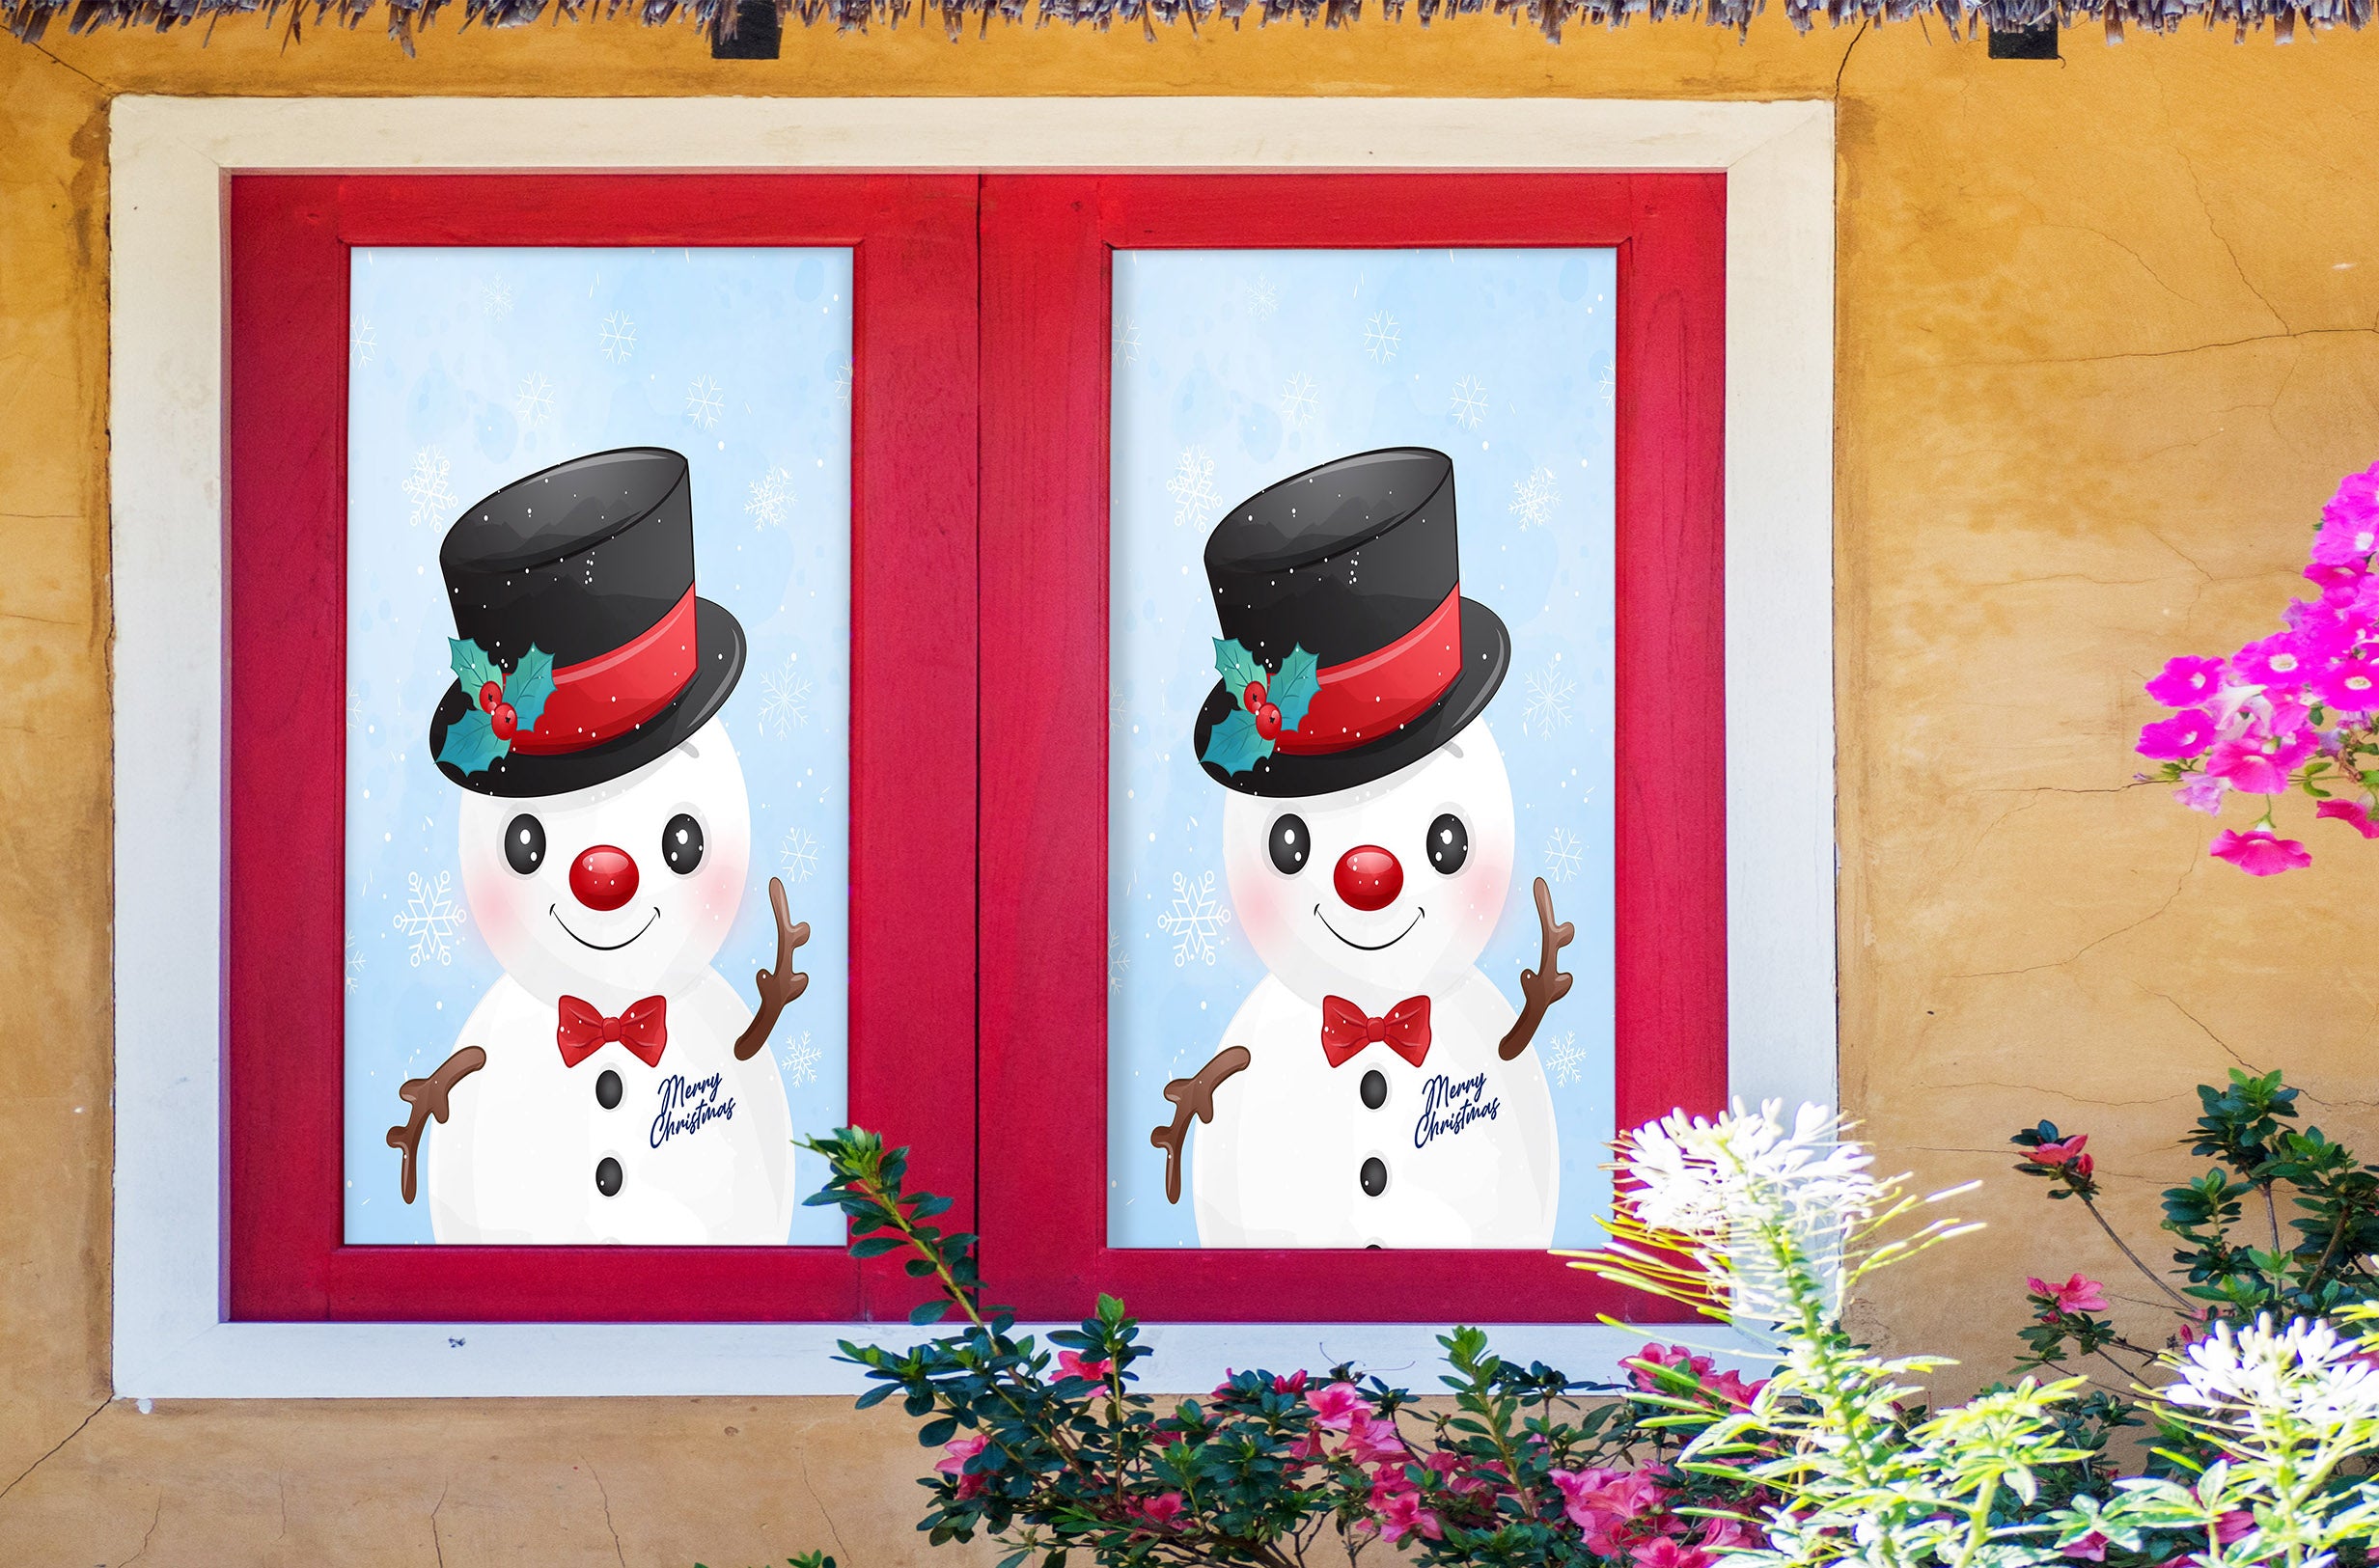 3D Snowman 30134 Christmas Window Film Print Sticker Cling Stained Glass Xmas